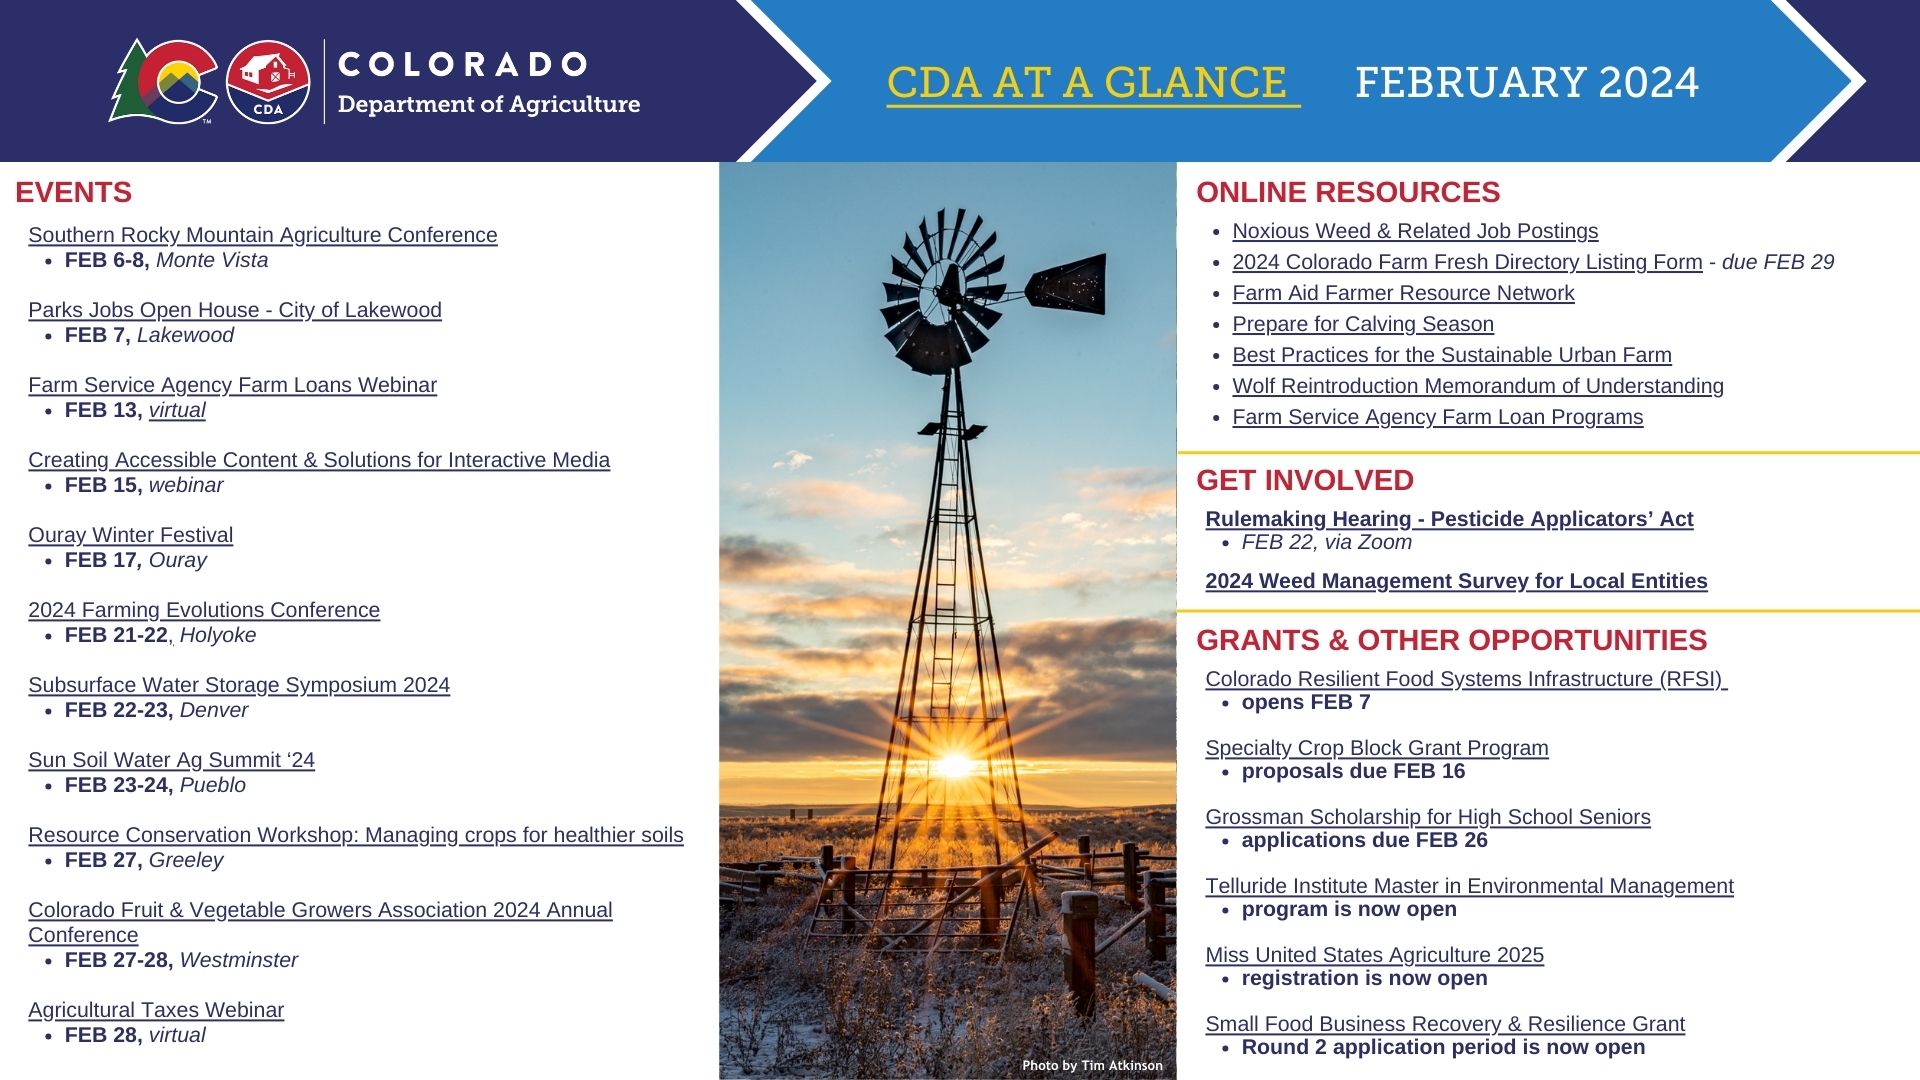 February newsletter in accessibility-friendly new format, featuring one decorative image of a windmill in a frosty sunset, and two columns listing relevant information under headers for Events, Online Resources, Get Involved, Grants and Other Opportunities for the month. 